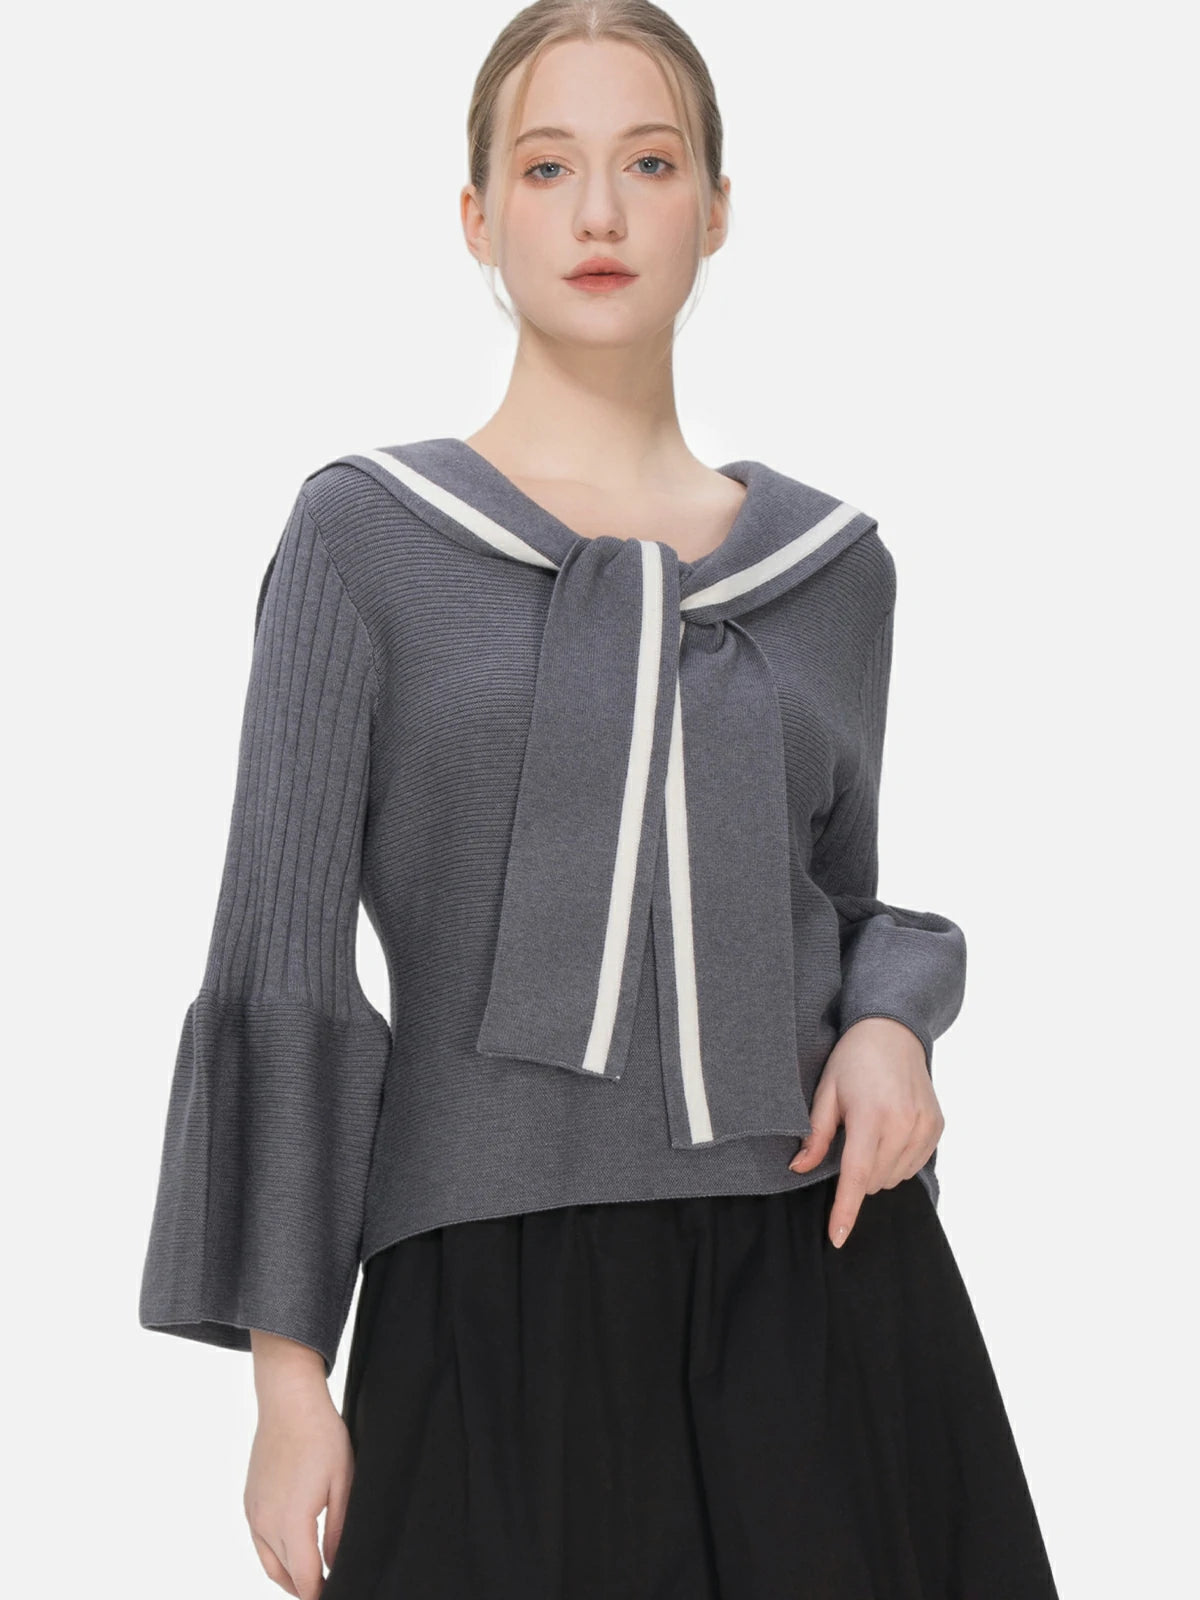 Elevate your style with this gray sweater featuring a navy collar and trumpet sleeves, embodying classic elegance and tasteful fashion for various occasions.